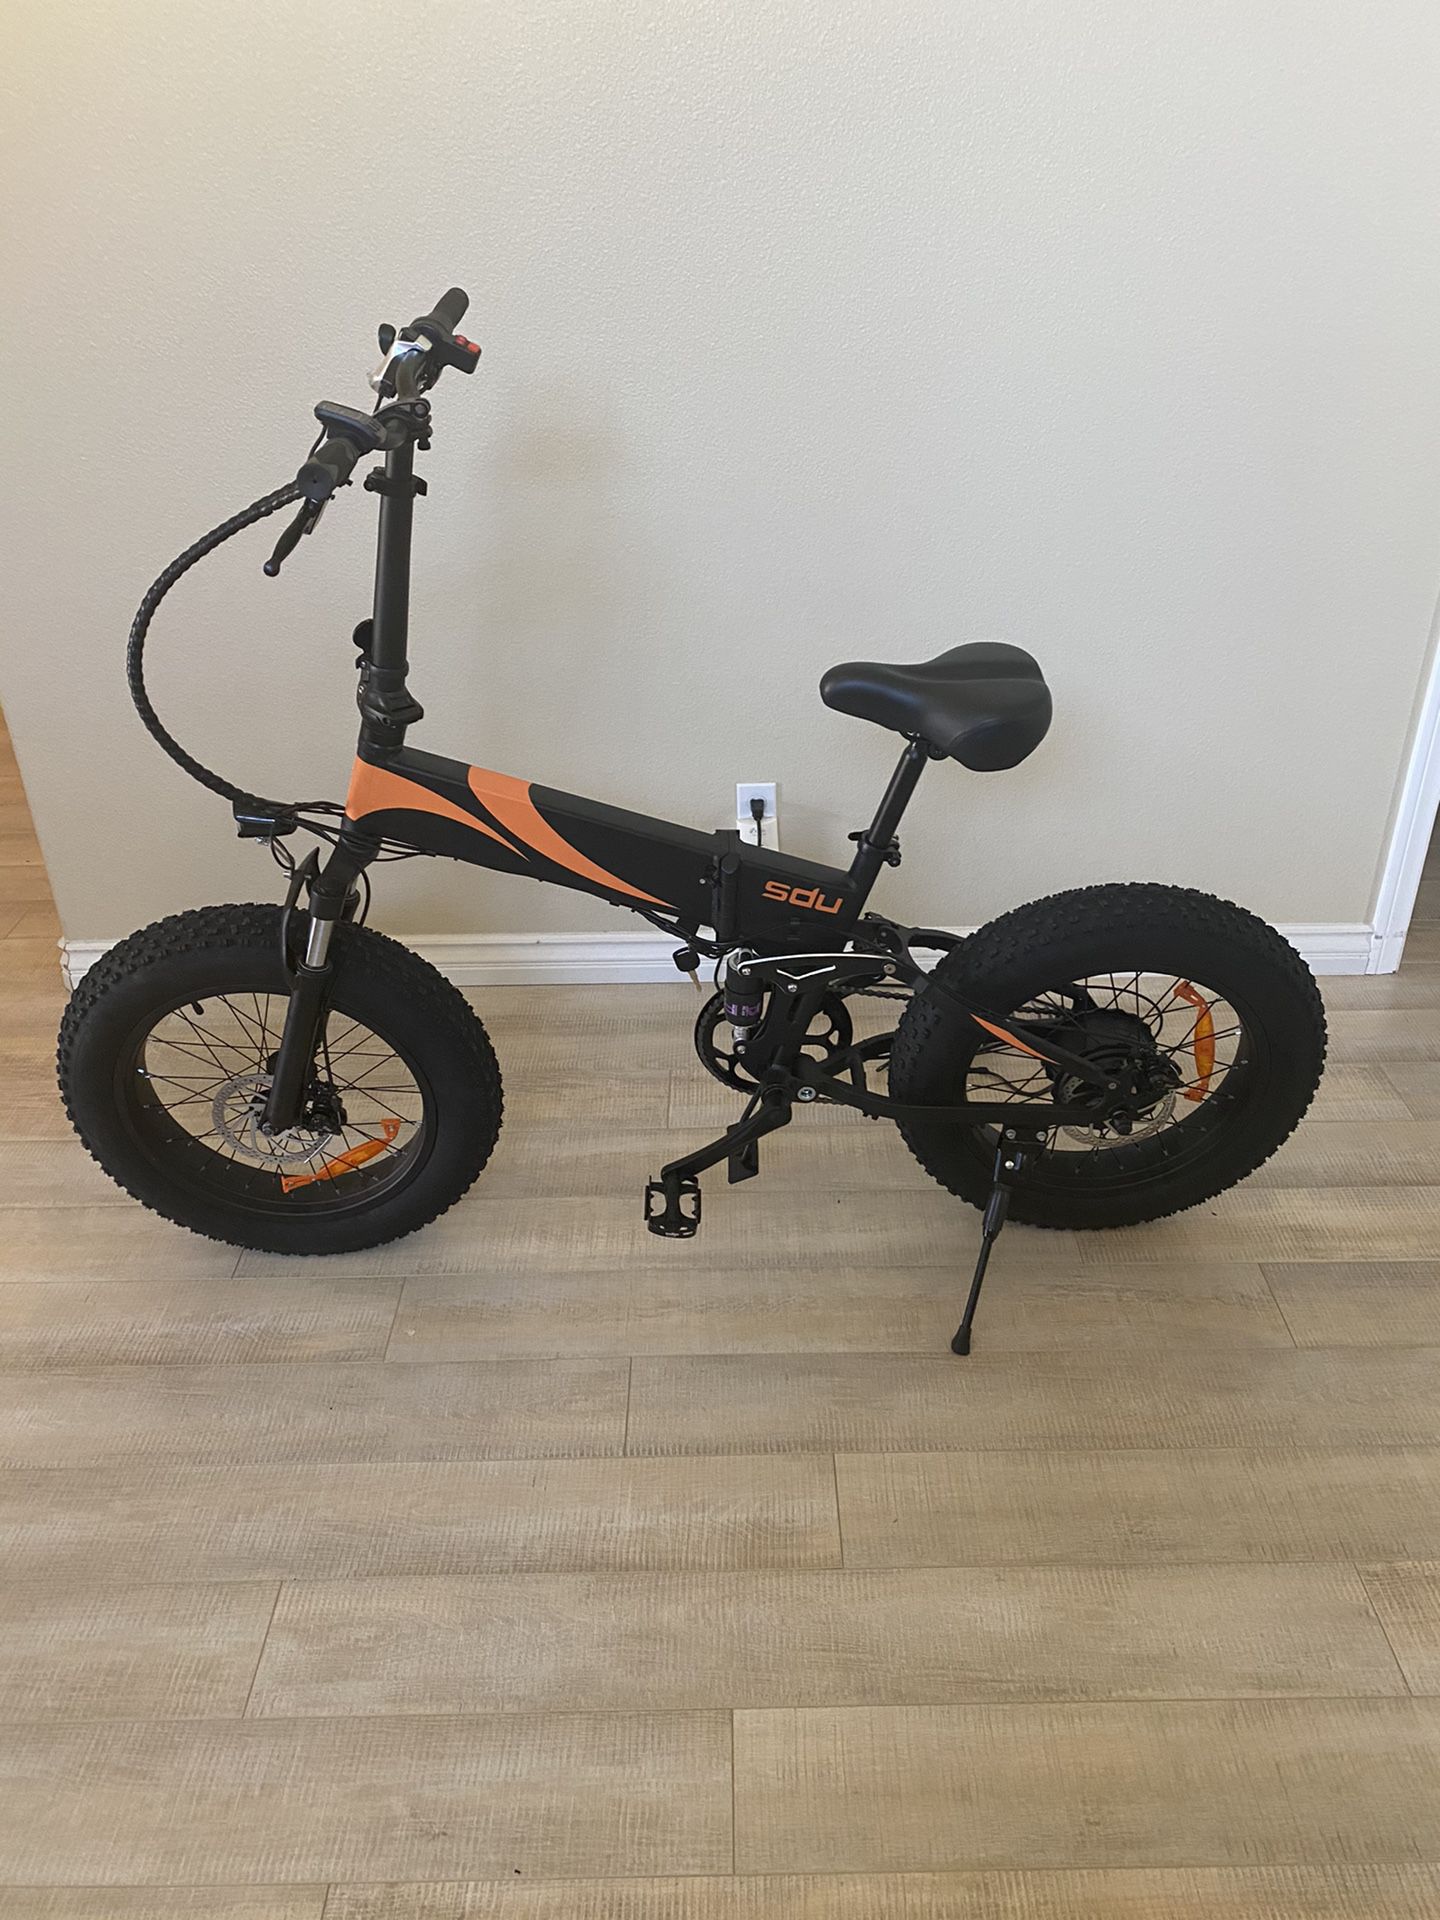 E-BIKE BRAND NEW STILL IN THE BOX!! HAVE 1 left Just Like this one In The Picture